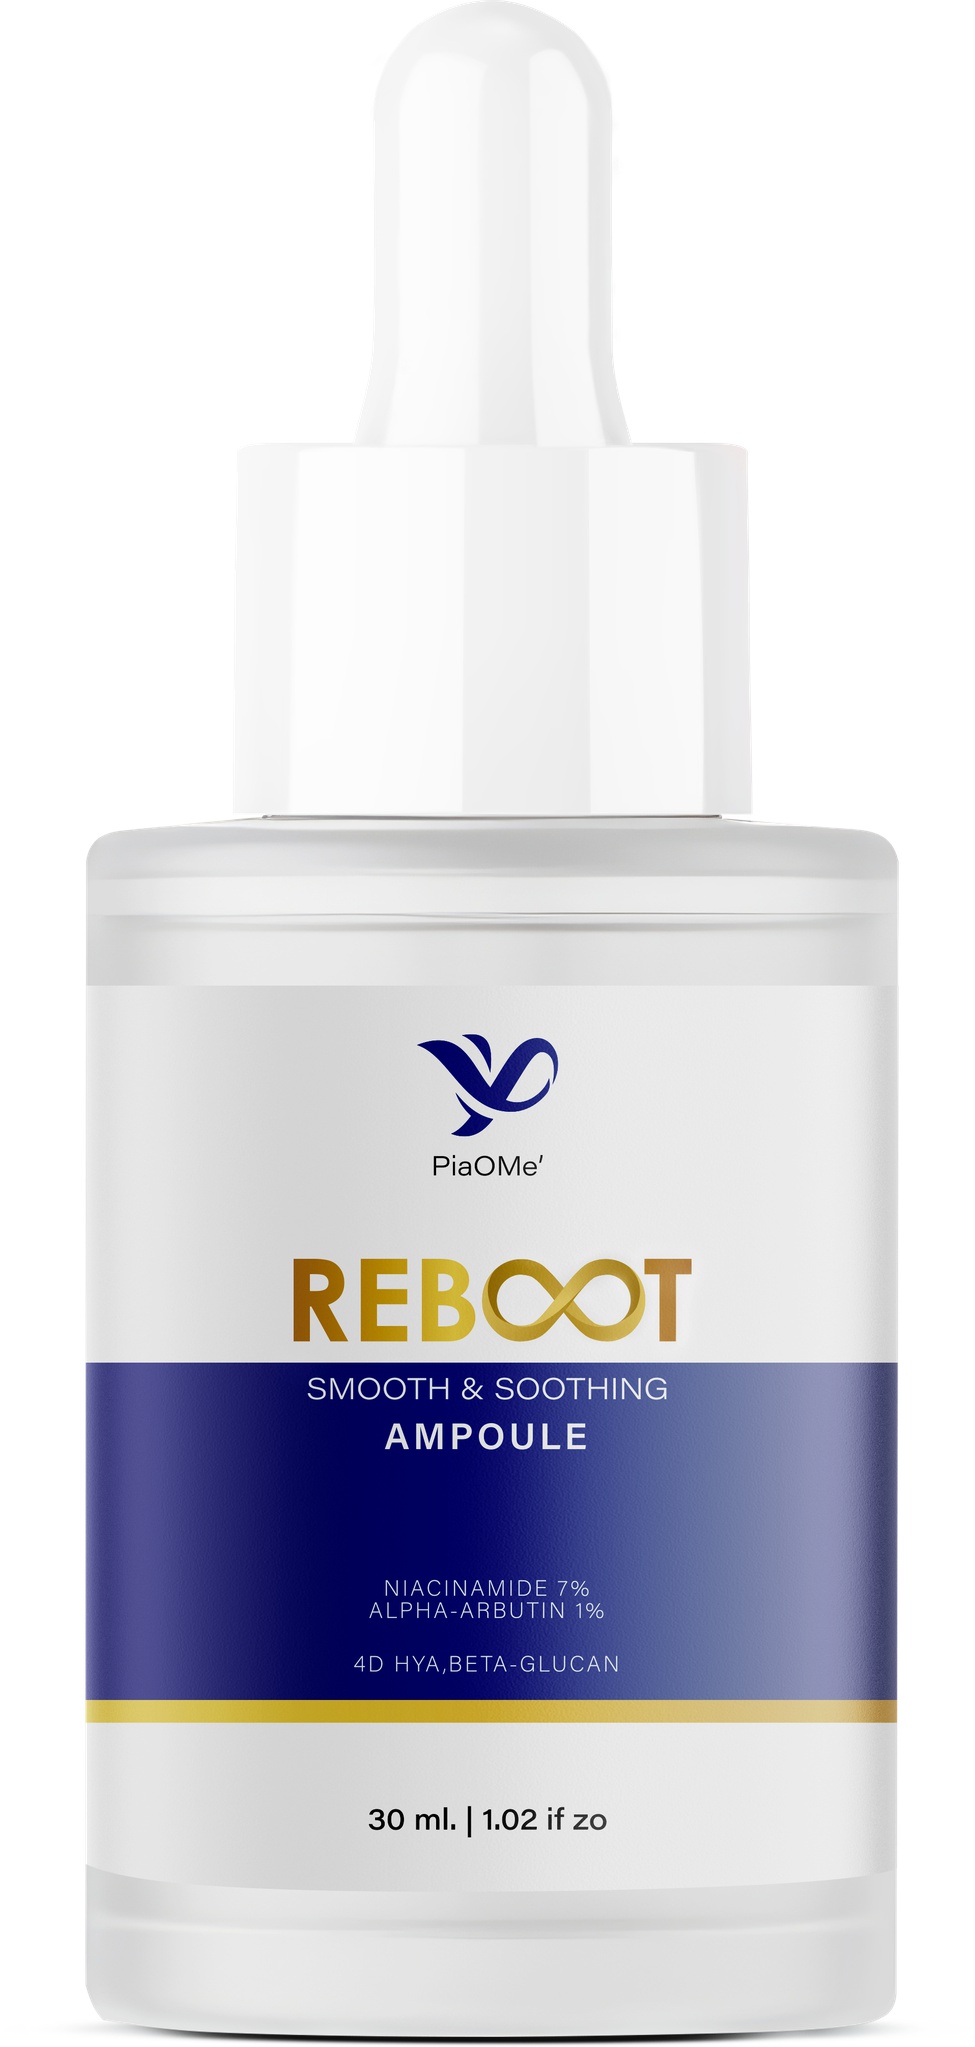 PIAOME' Reboot Smooth & Soothing Ampoule